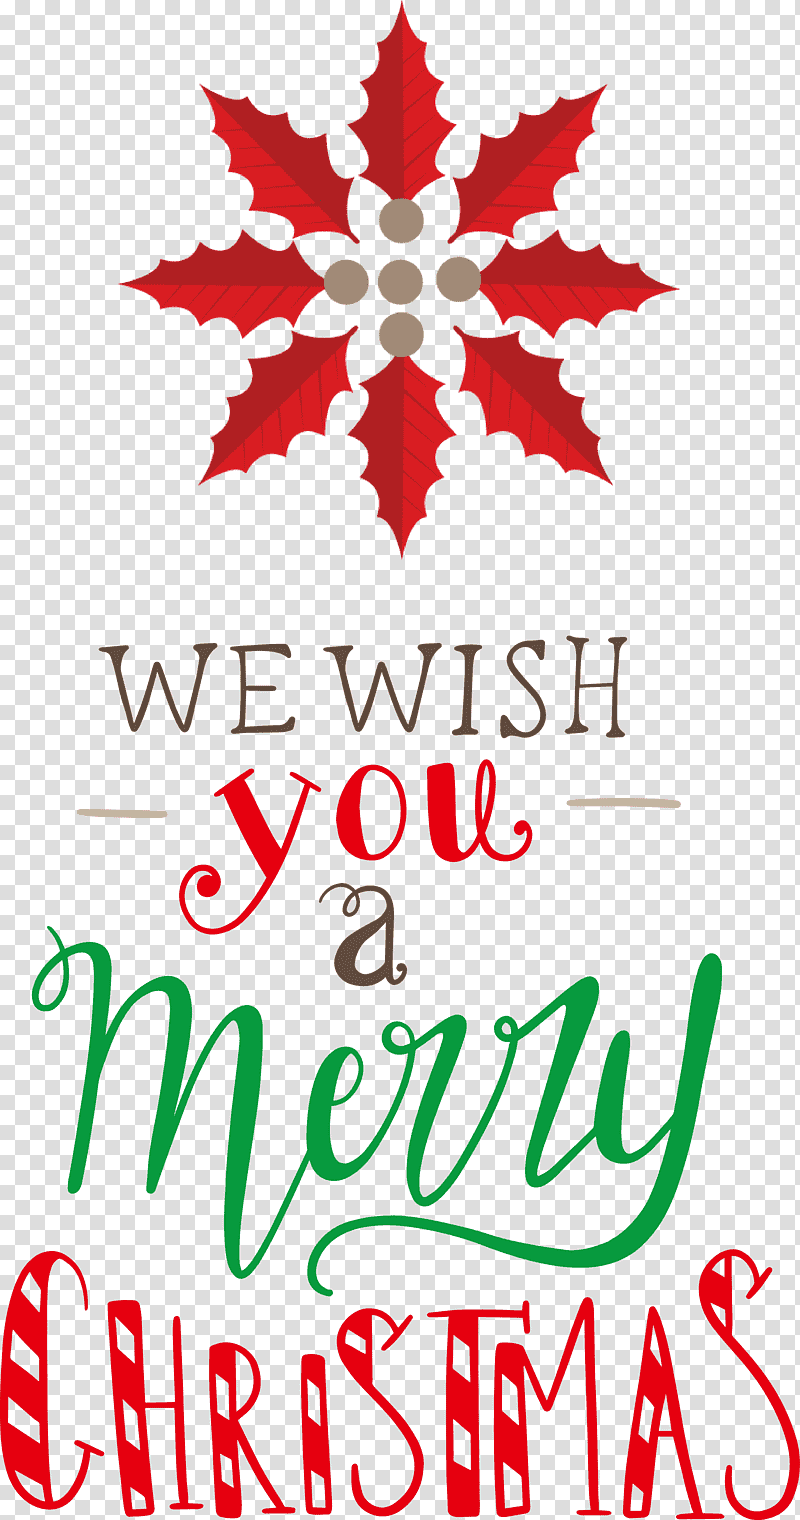 Merry Christmas We Wish You A Merry Christmas, Christmas Tree, Christmas Day, Floral Design, Holiday Ornament, Christmas Ornament, Christmas Ornament M transparent background PNG clipart